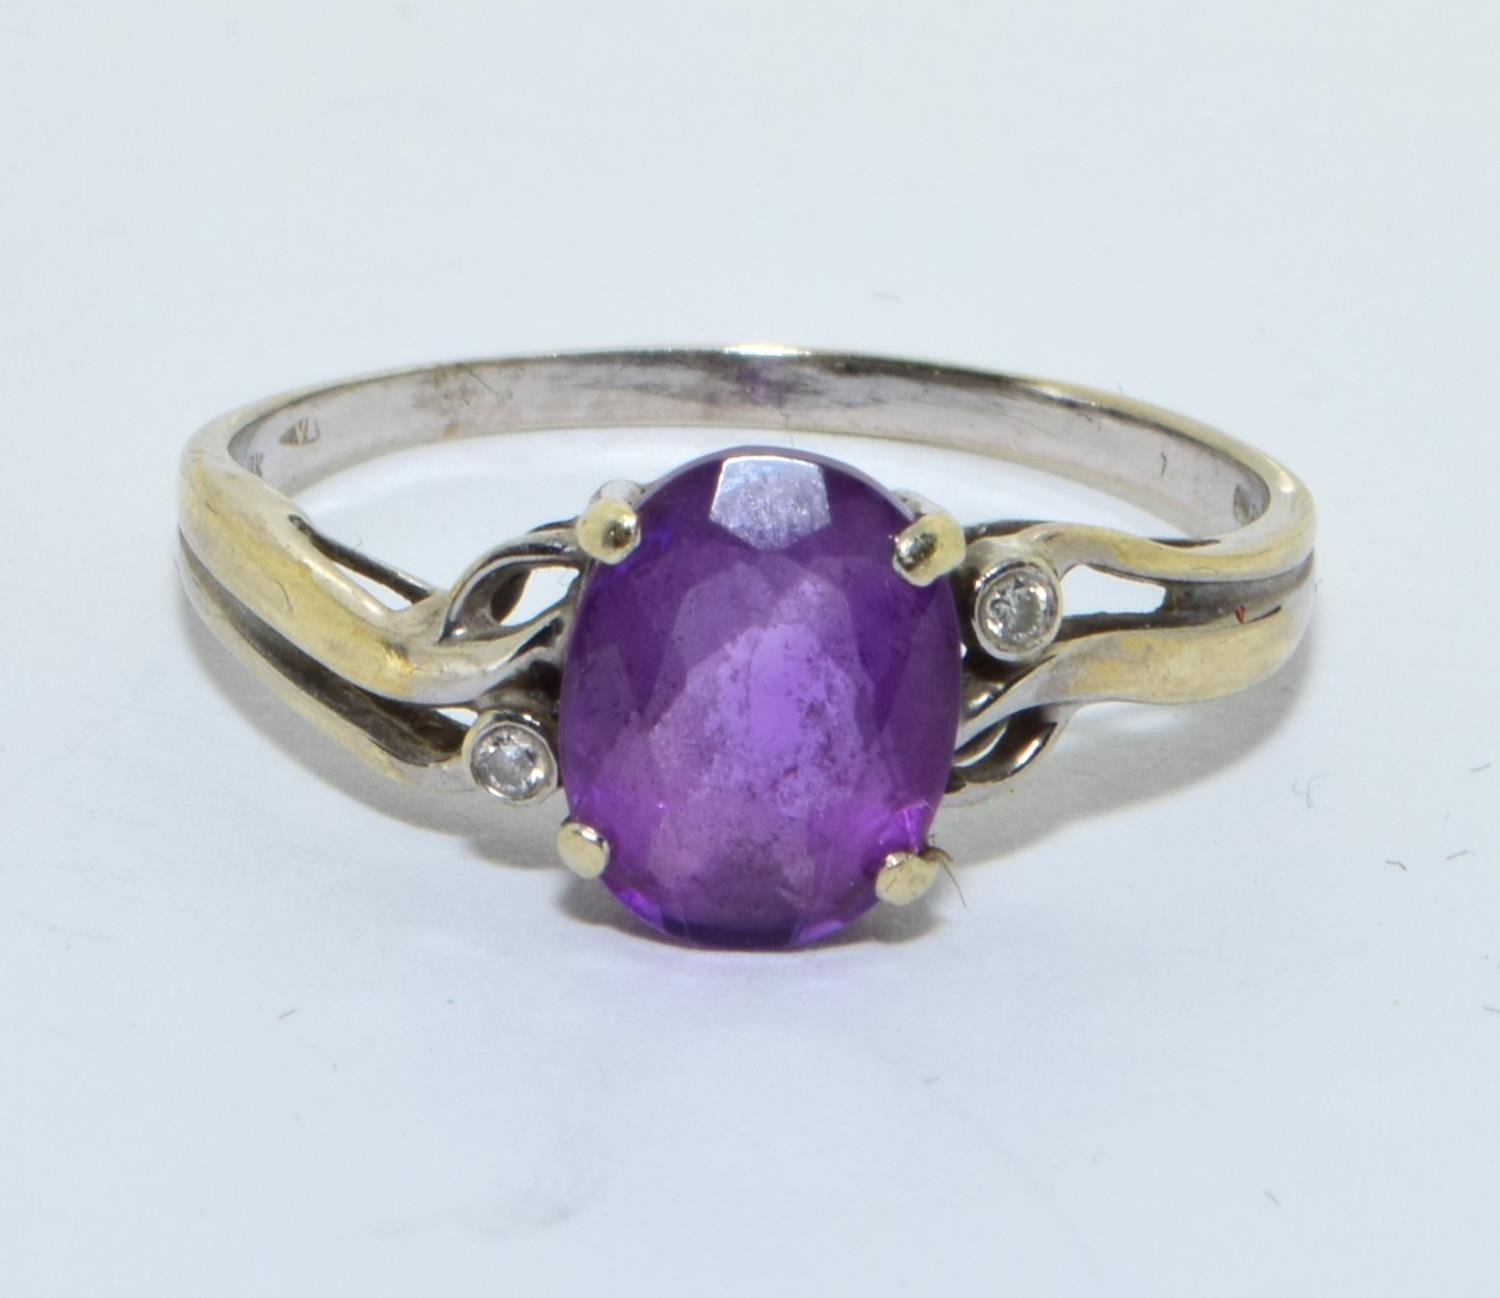 9ct white gold ladies Amethyst and diamond open work setting ring size S - Image 5 of 5